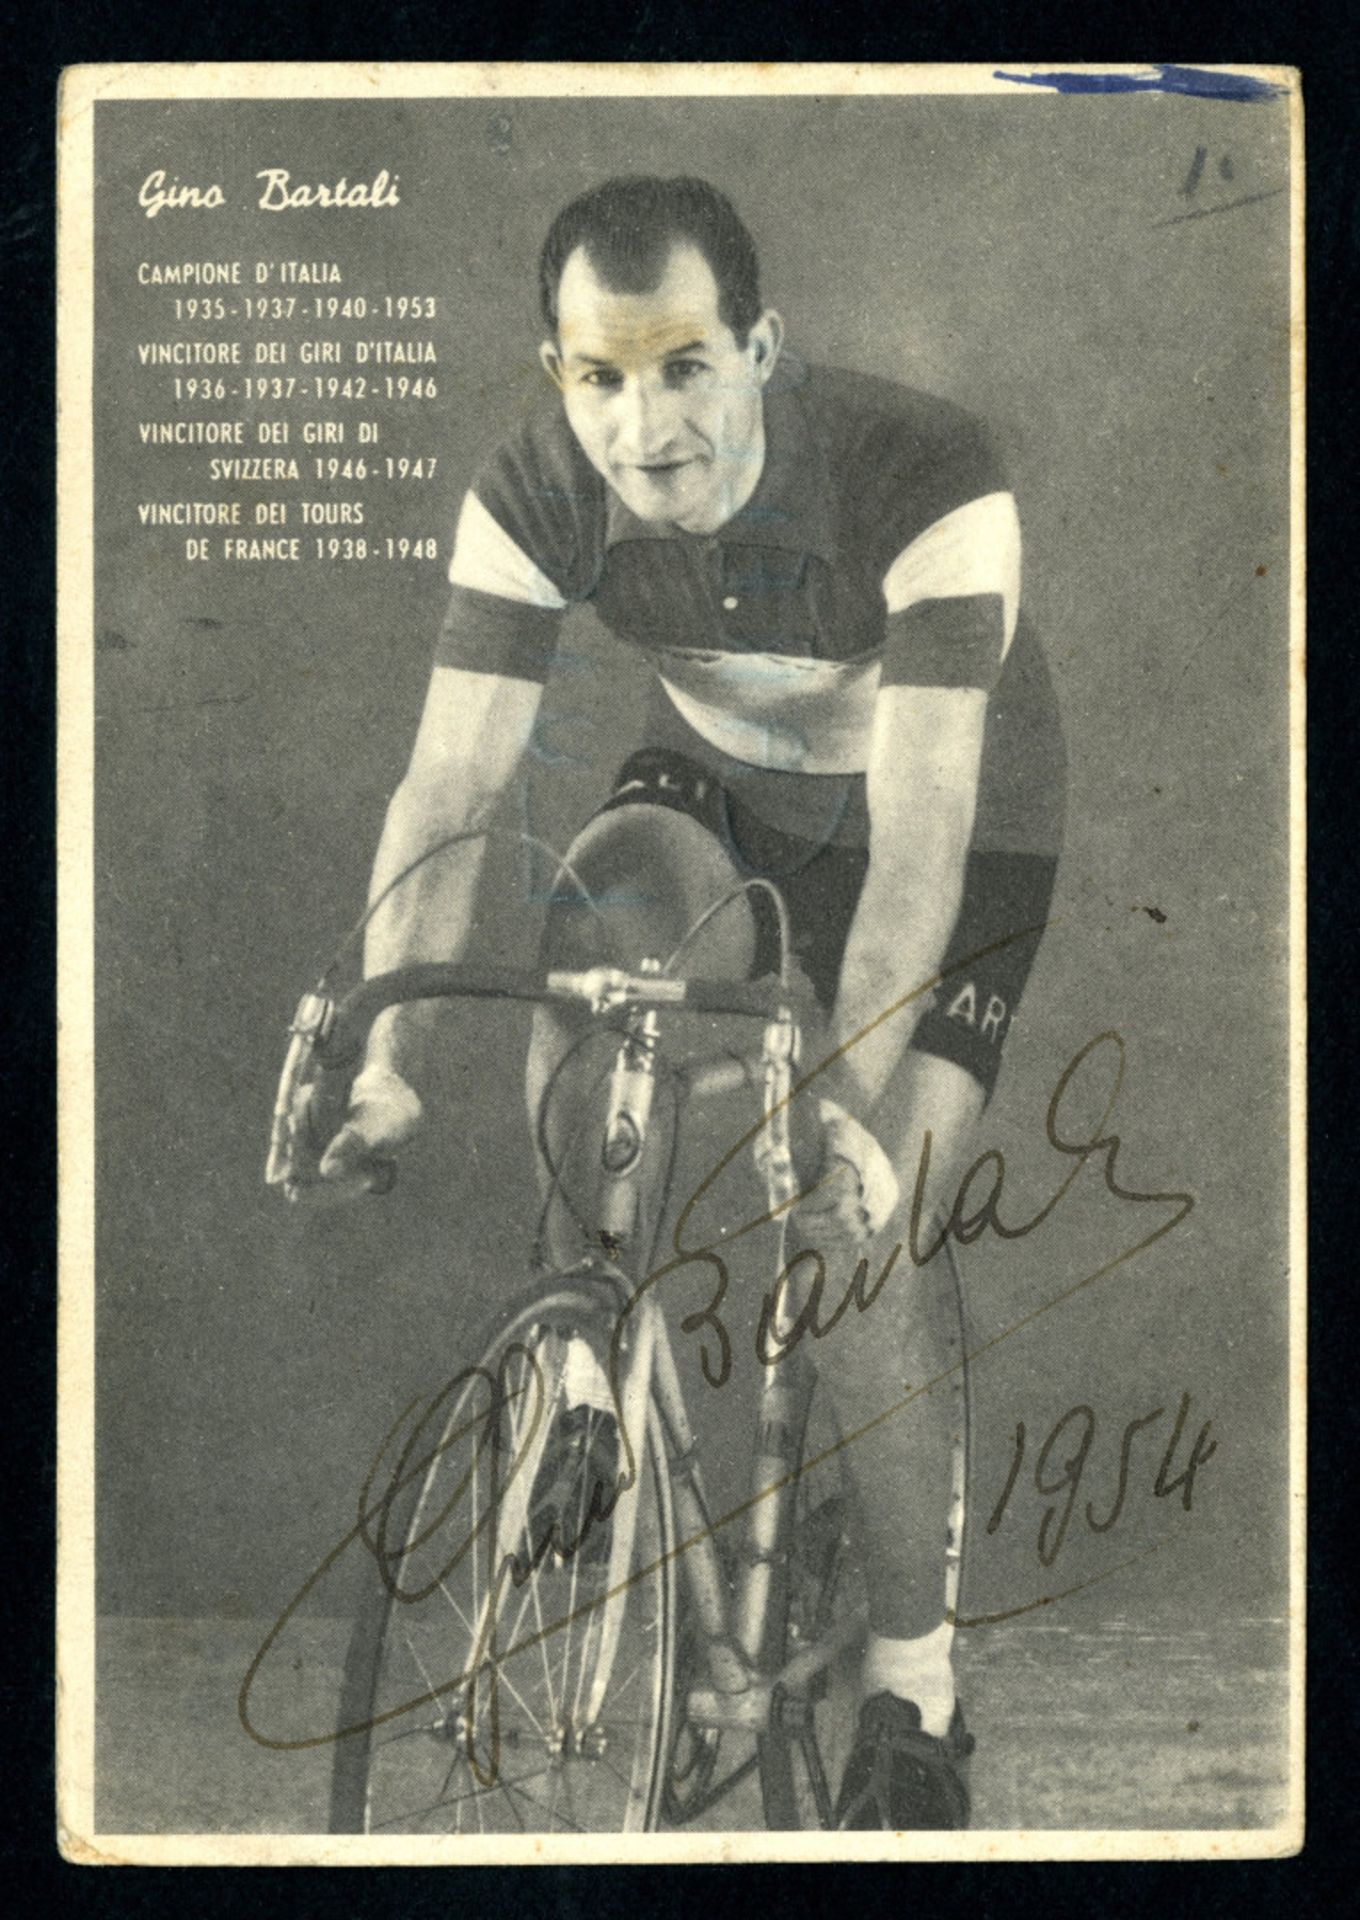 Gino Bartali - 1954 - Photographic postcard with autographed signature from his last year as a